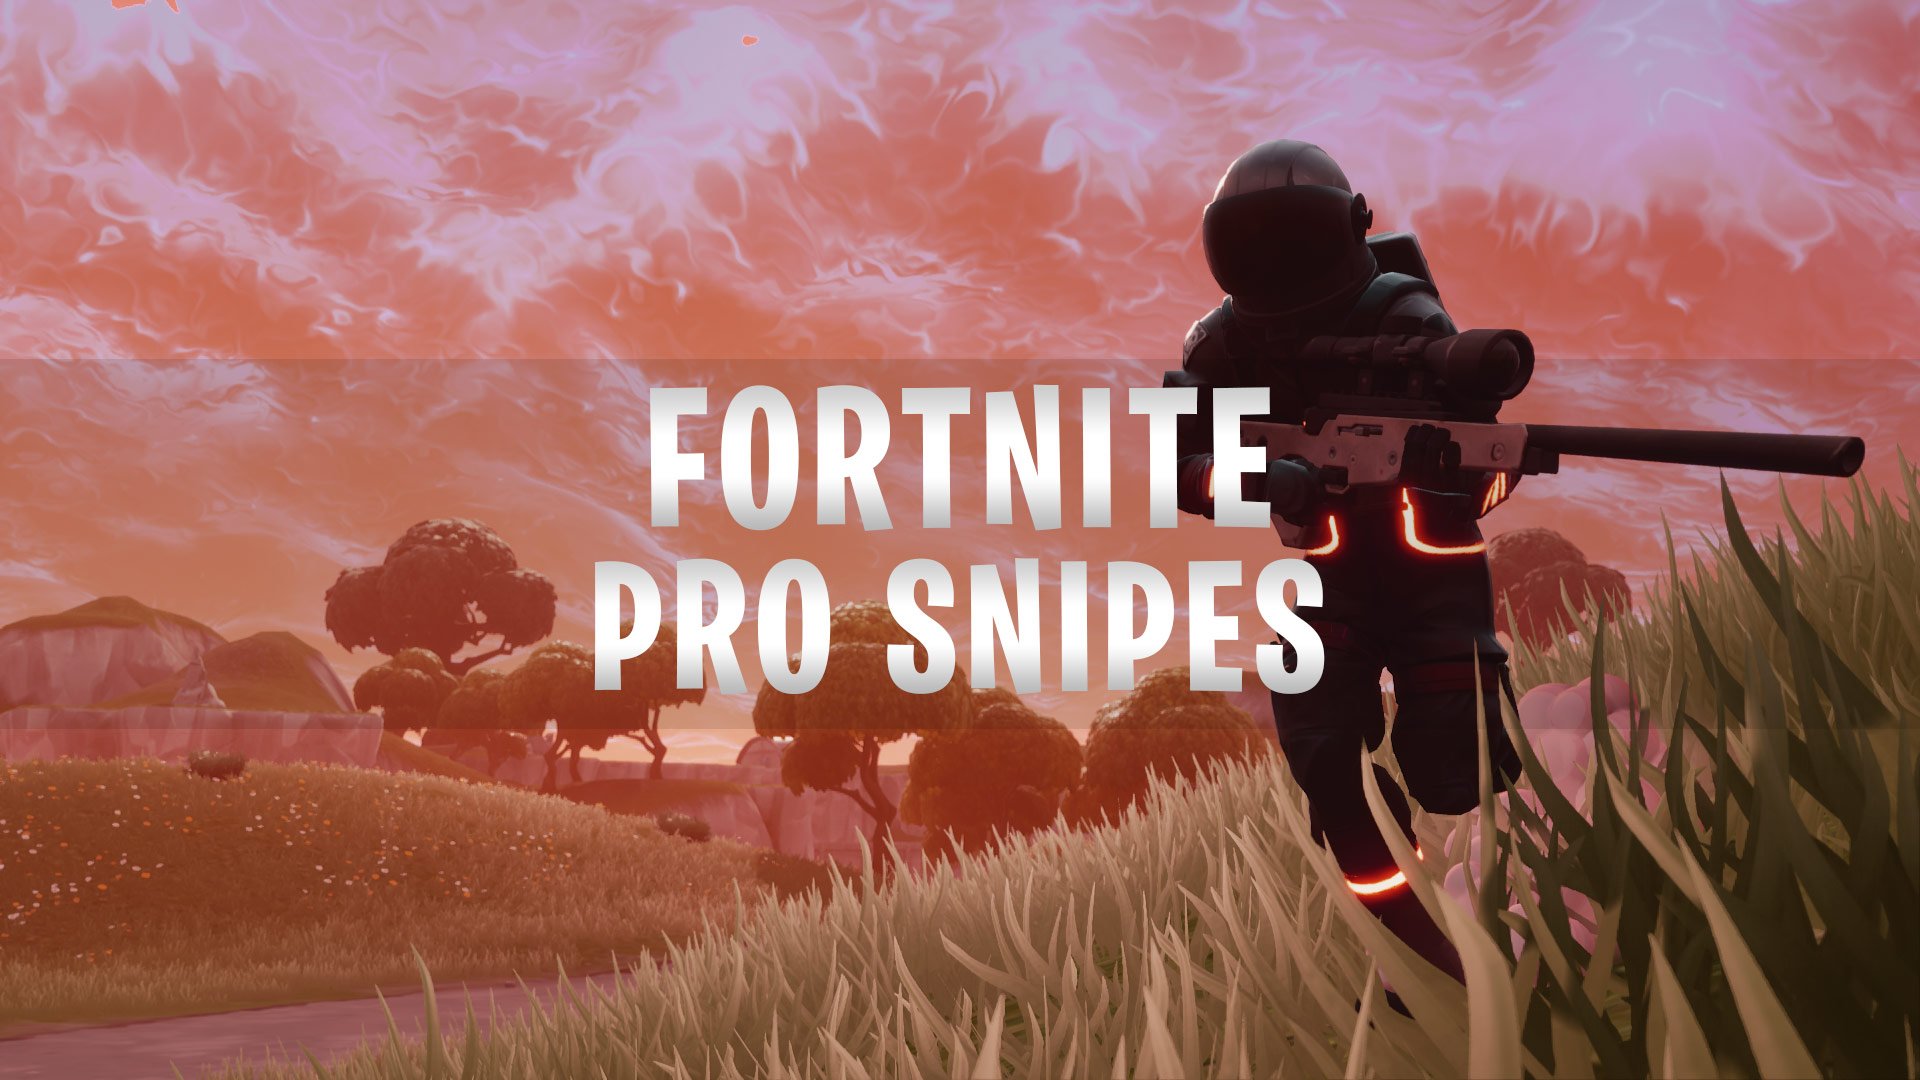 Fortnite Snipe Lobbies Fortnite Pro Snipes Solo Duo Squad What Is It And How To Join